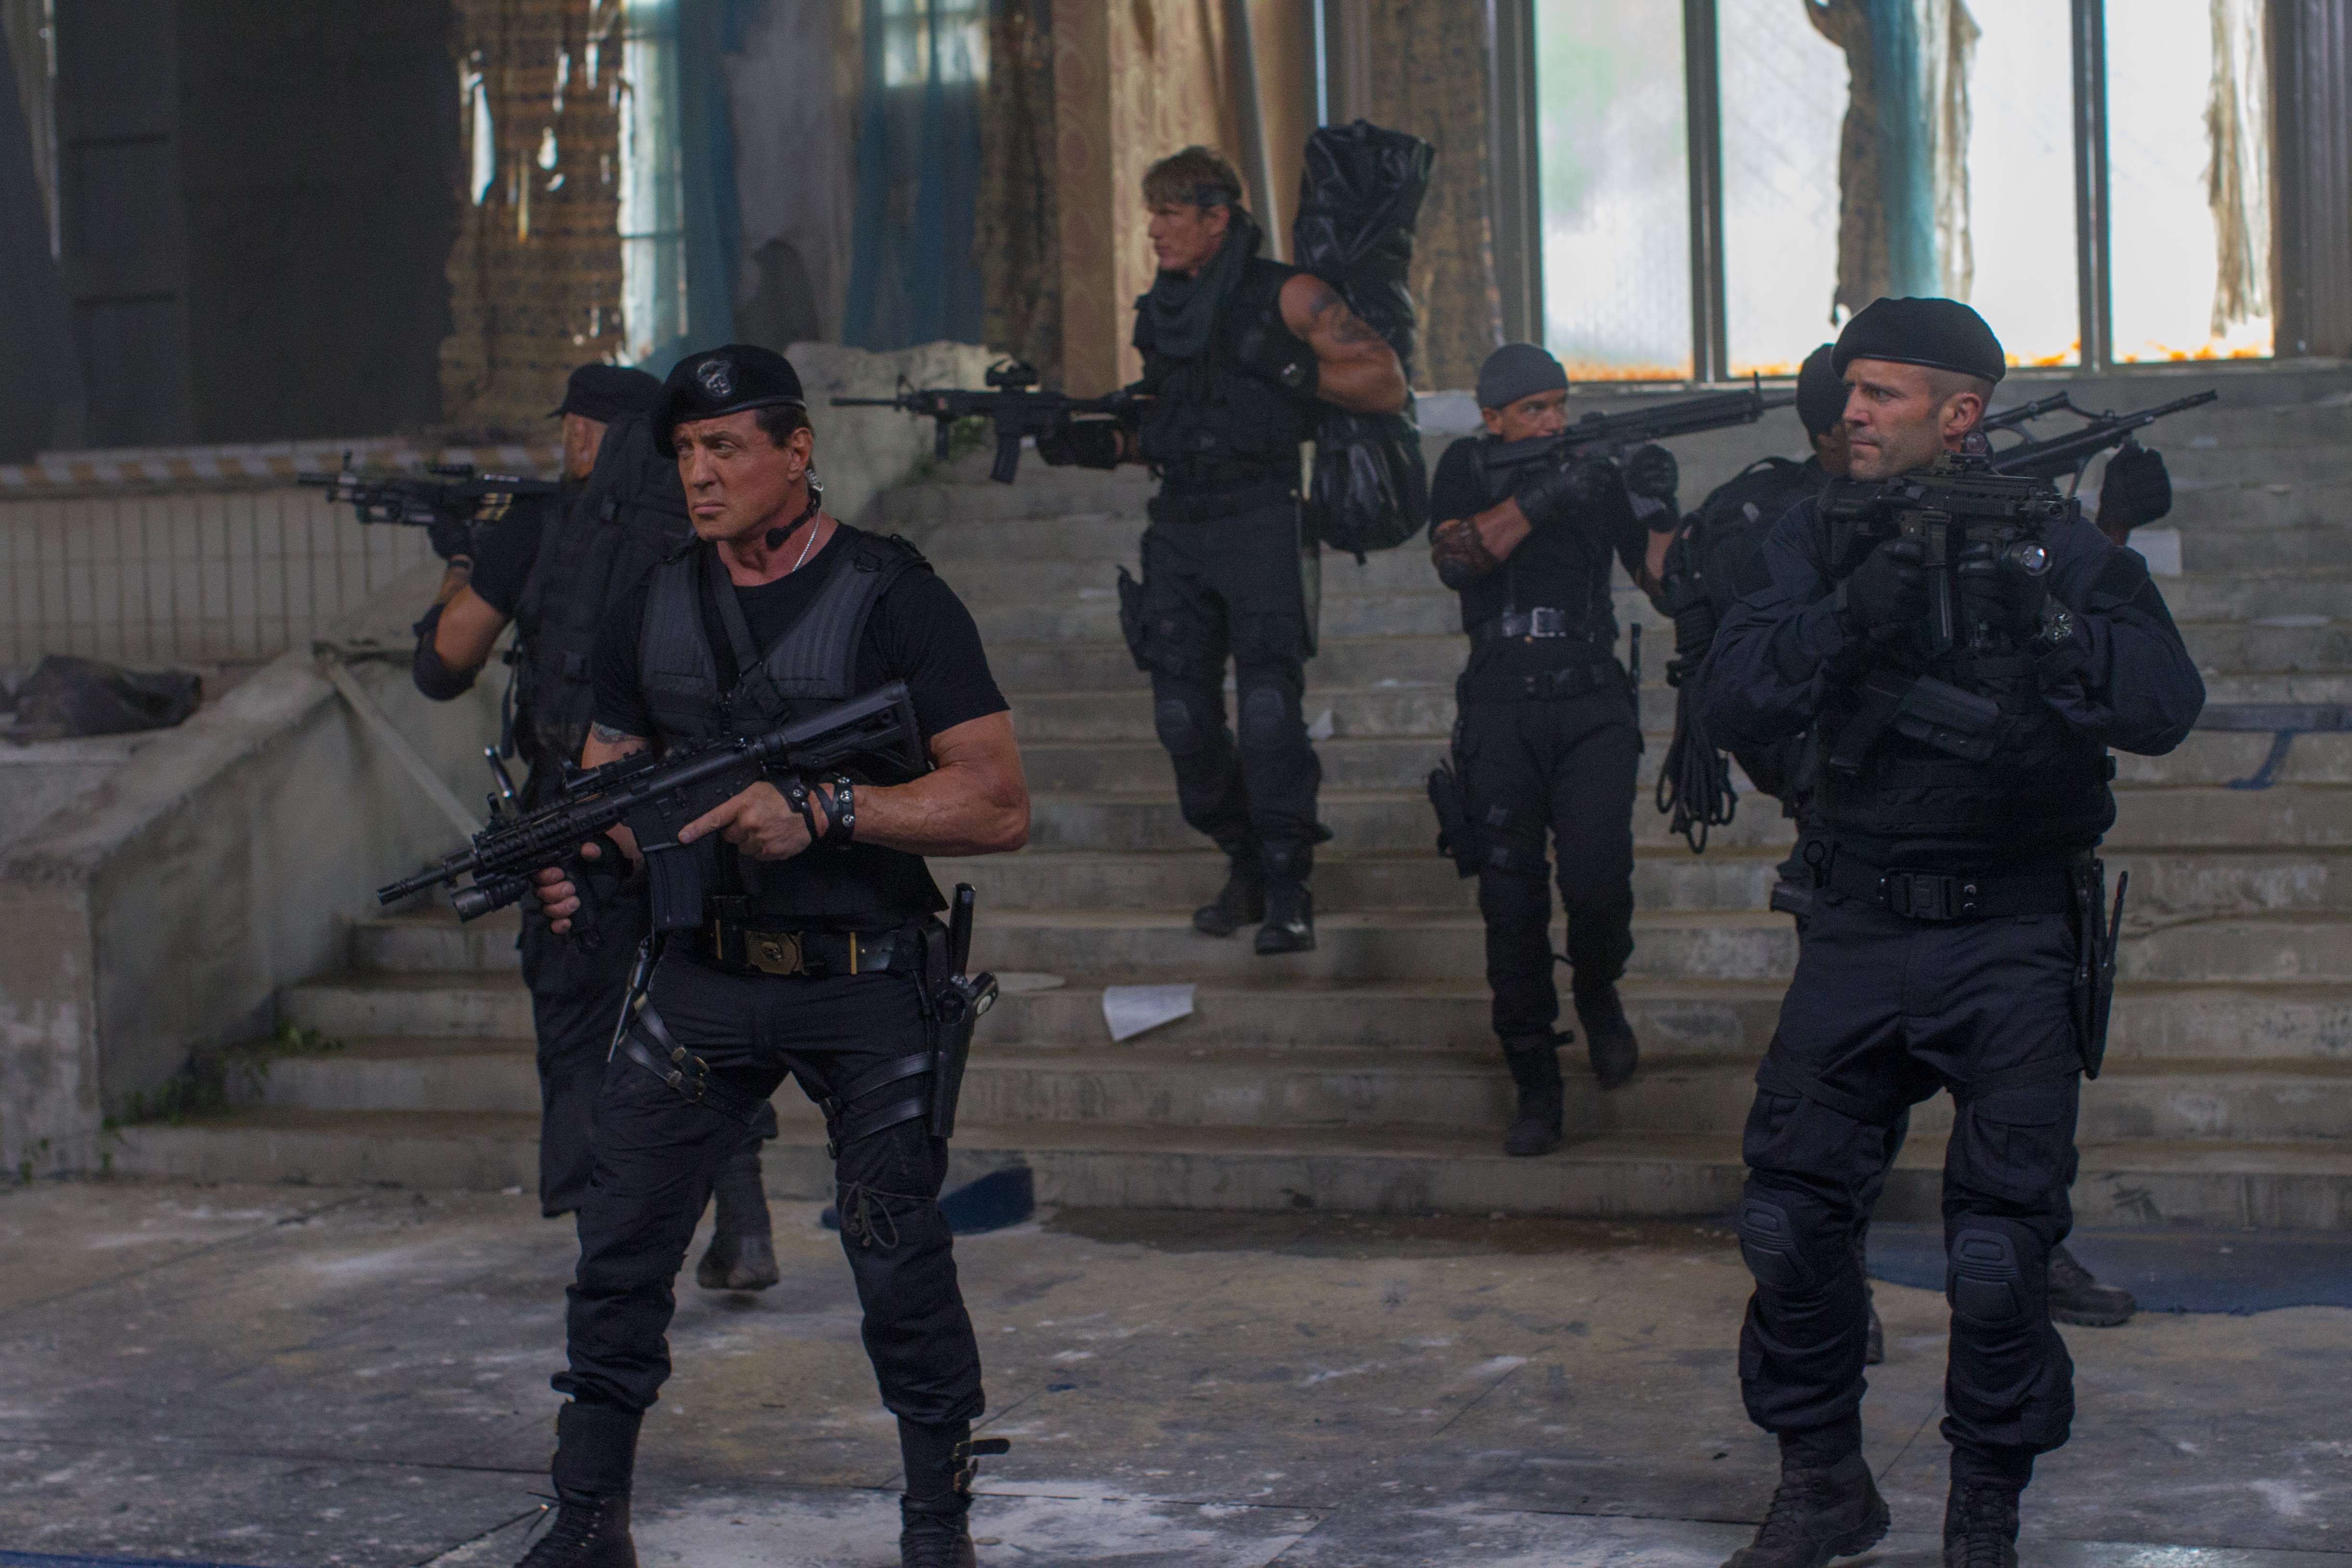 movie, the expendables 3, antonio banderas, barney ross, dolph lundgren, galgo (the expendables), gunnar jensen, jason statham, lee christmas, sylvester stallone, the expendables